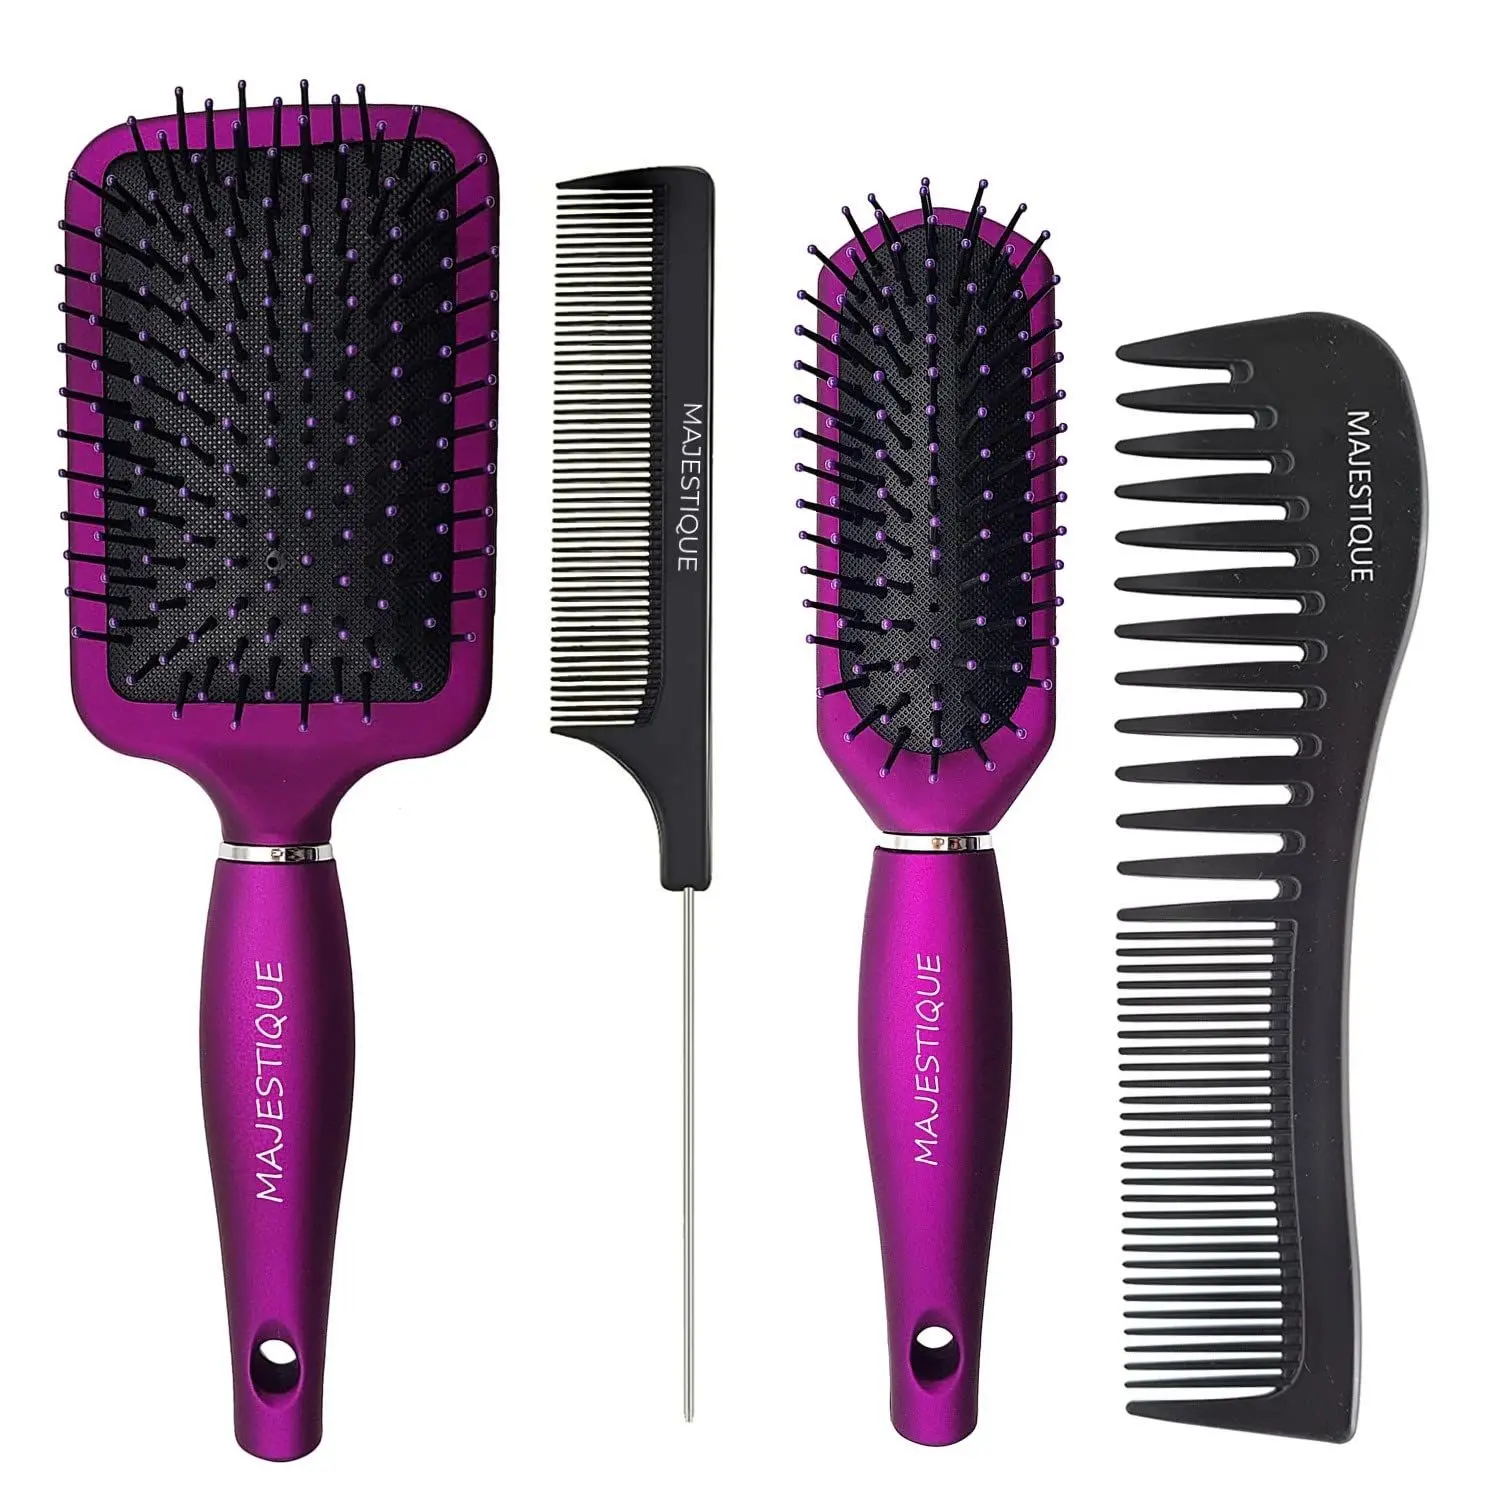 Majestique Hair Brush Set - Paddle, Styling, Tail Comb & Wide Tooth Comb for Women & Men, Great on Wet or Dry Hair -Gold